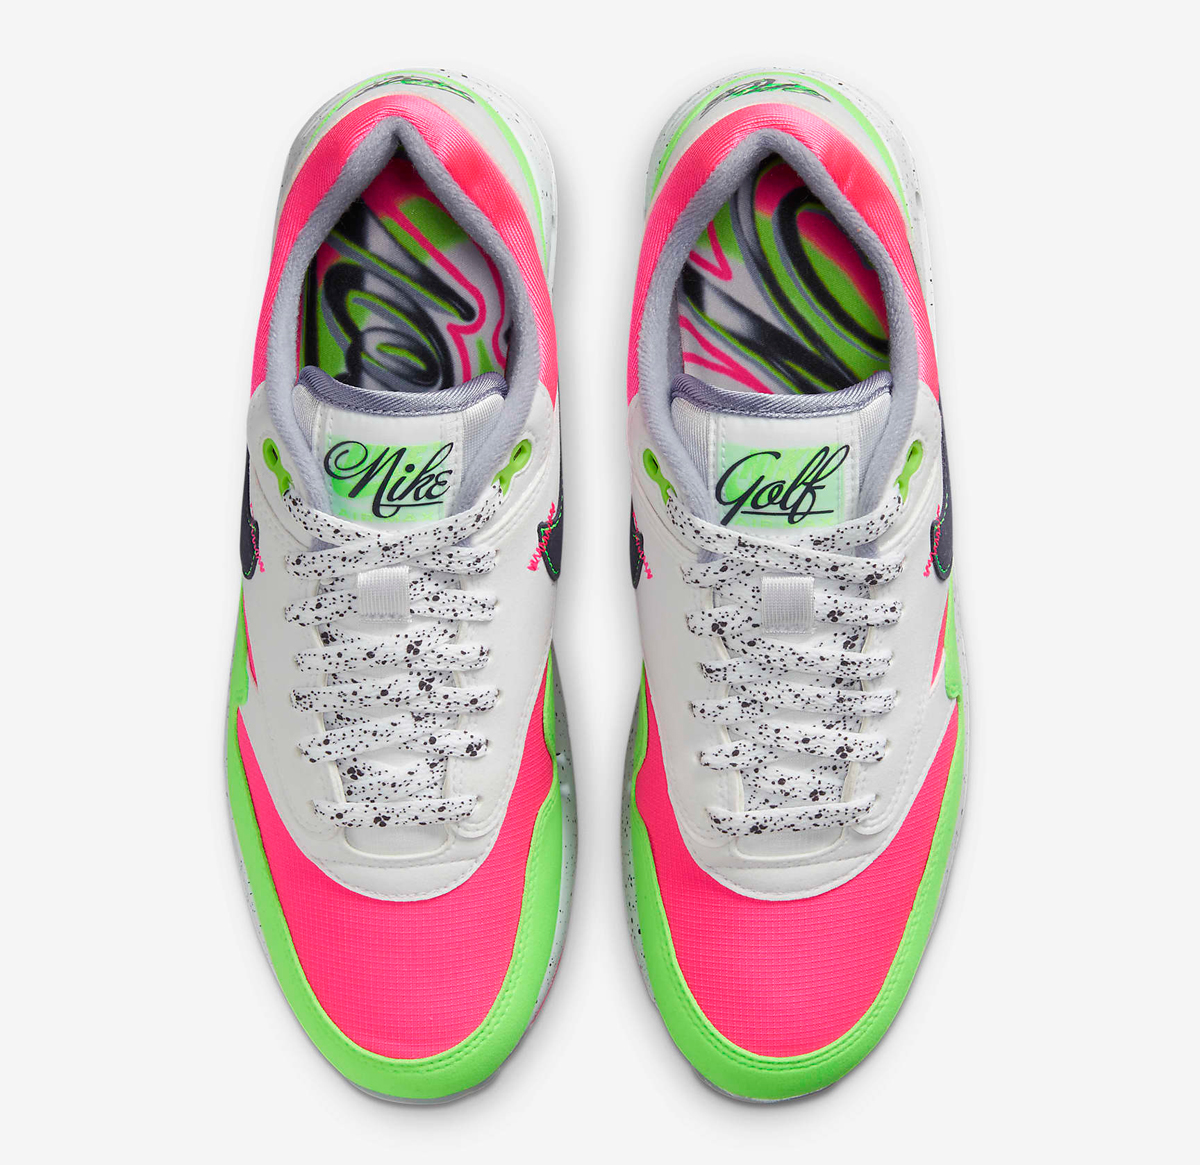 Nike-Air-Max-1-86-Golf-Water-Melon-US-Open-Release-Date-4